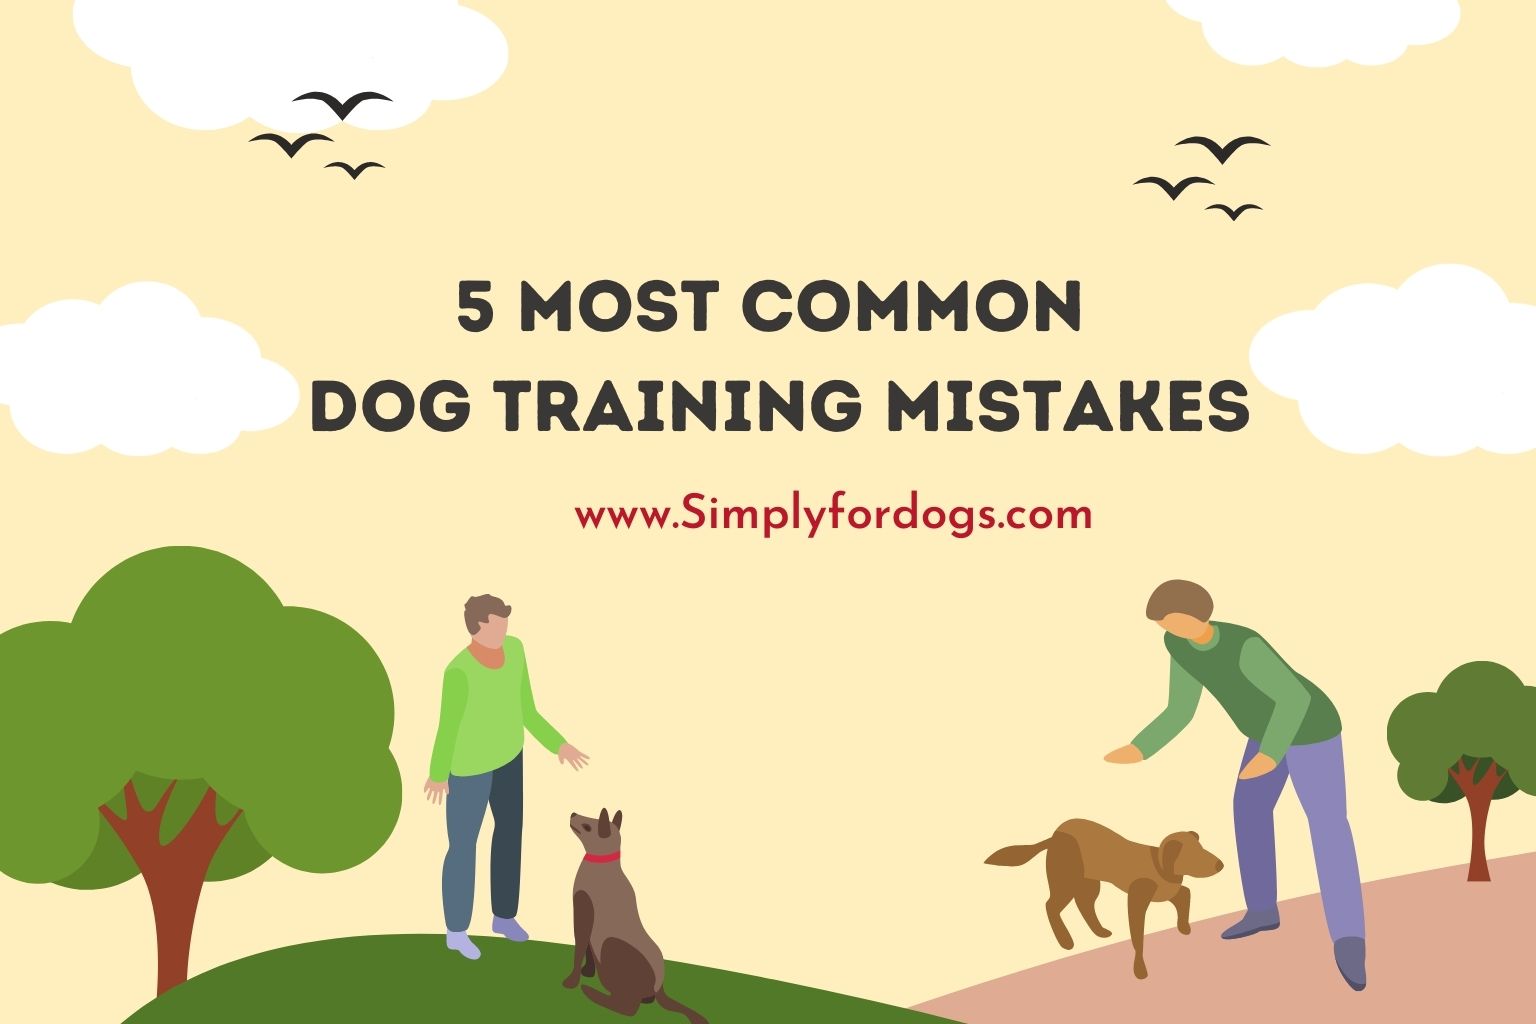 5 Most Common Dog Training Mistakes